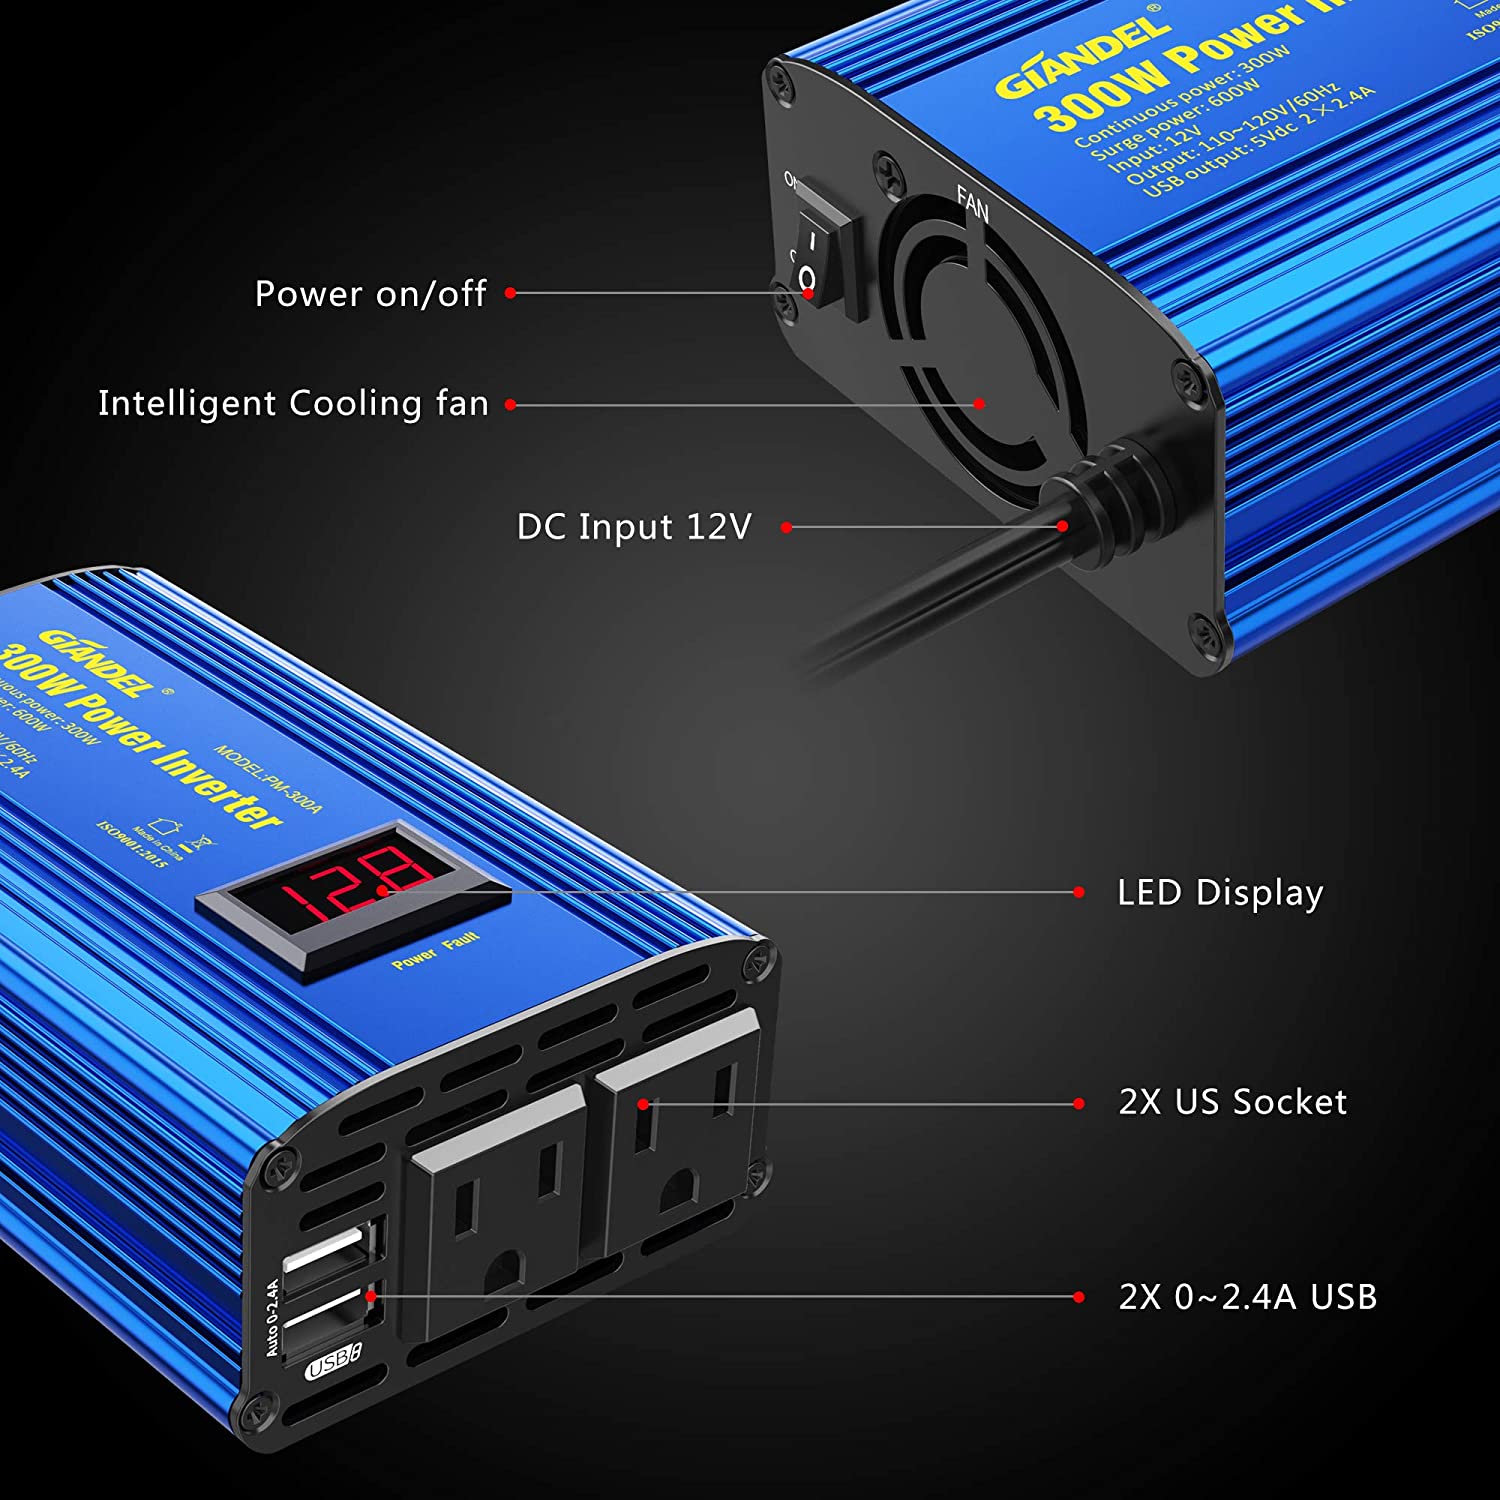 Power Inverter 300W DC 12V to AC 110V Car Converter Adapter with LED Display & 2.4A Dual USB Ports - e4cents